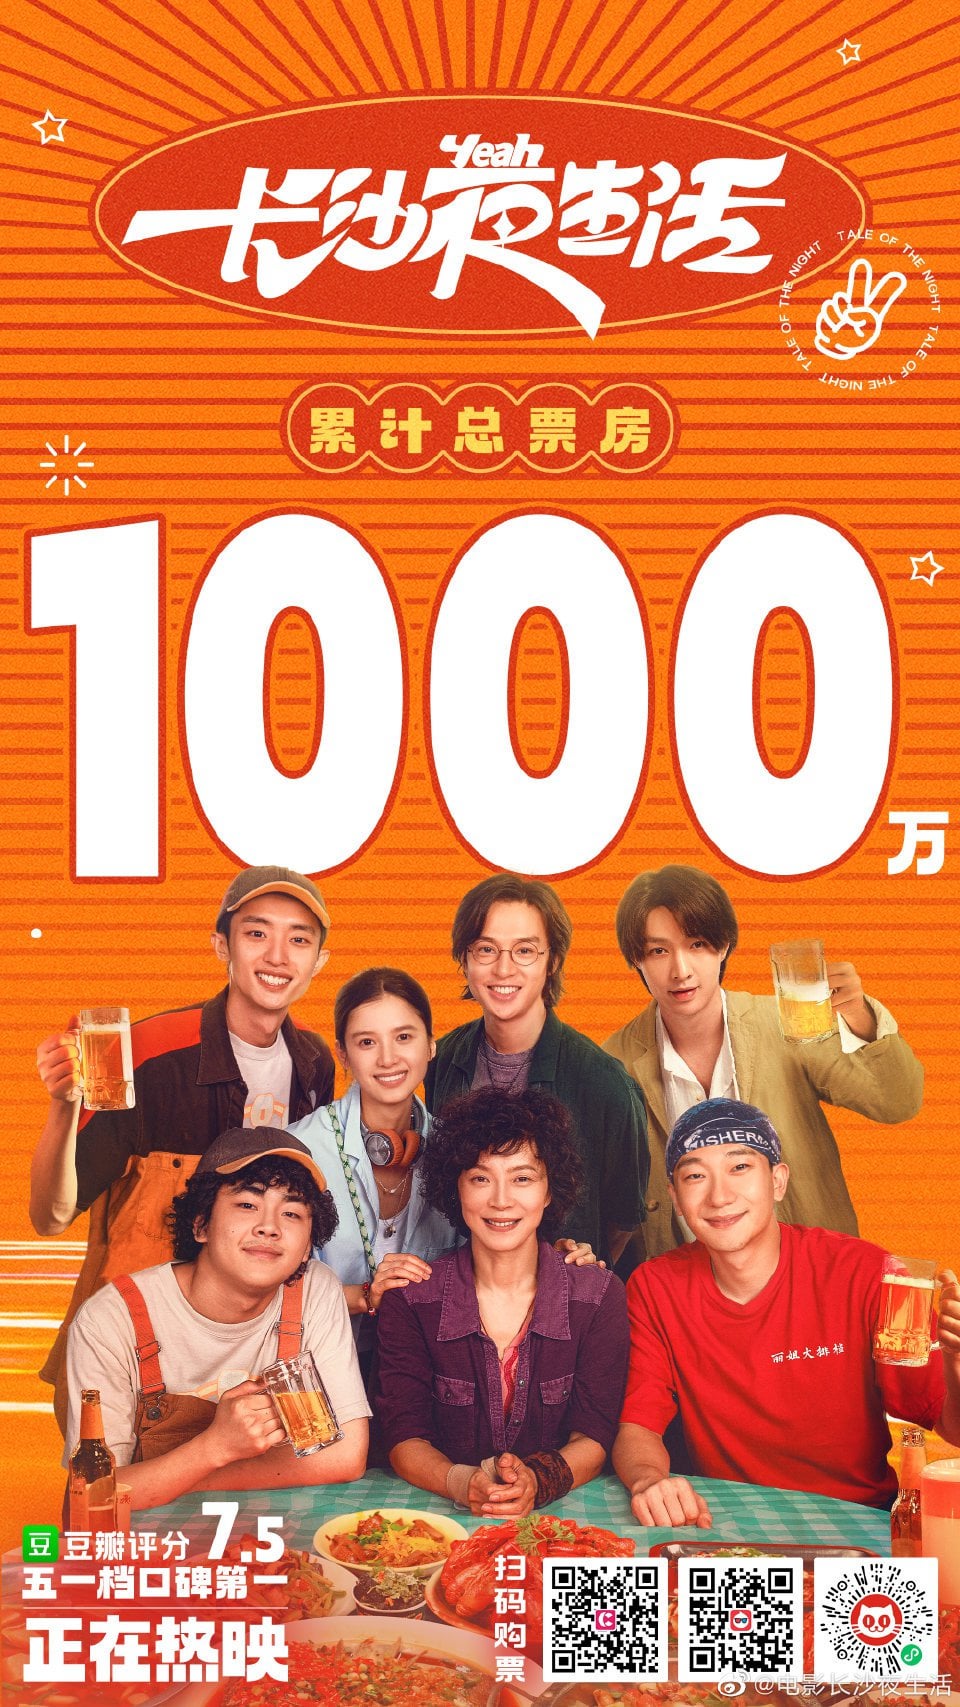 'Tale of the Night' featuring Lay has reached 10,000,000 box office